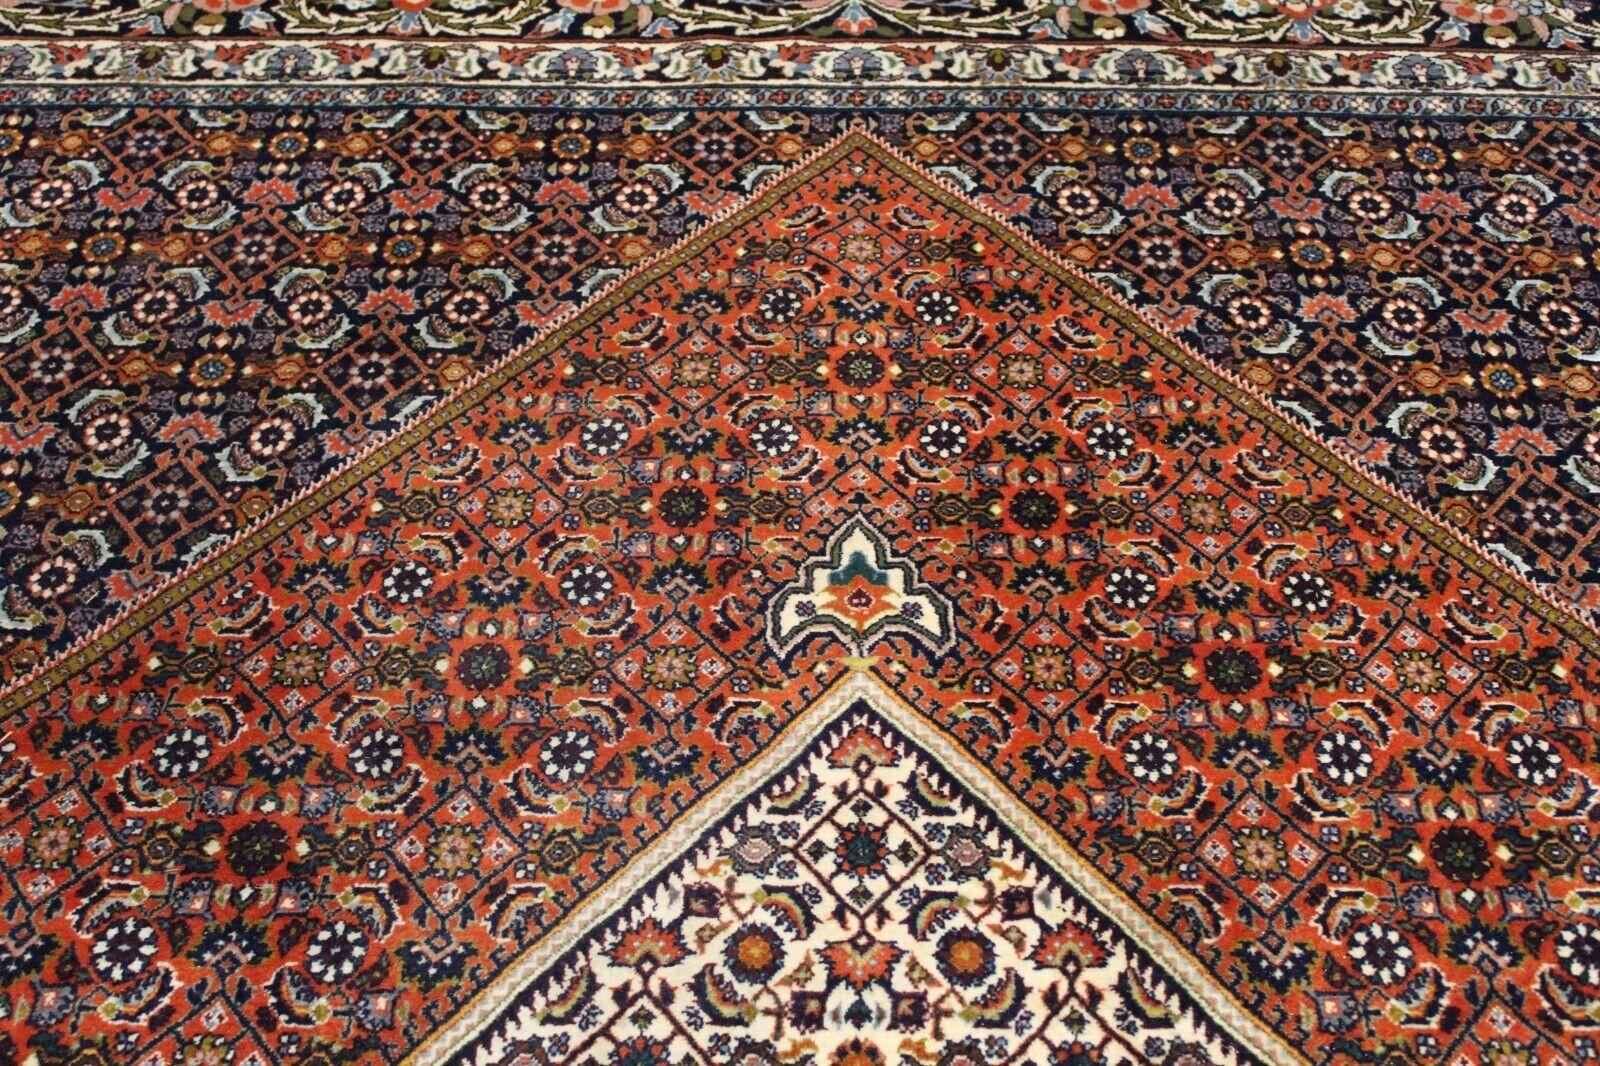 Hand-Knotted Handmade Vintage Persian Style Bidjar Rug 10' x 11.4', 1960s - 1K42 For Sale